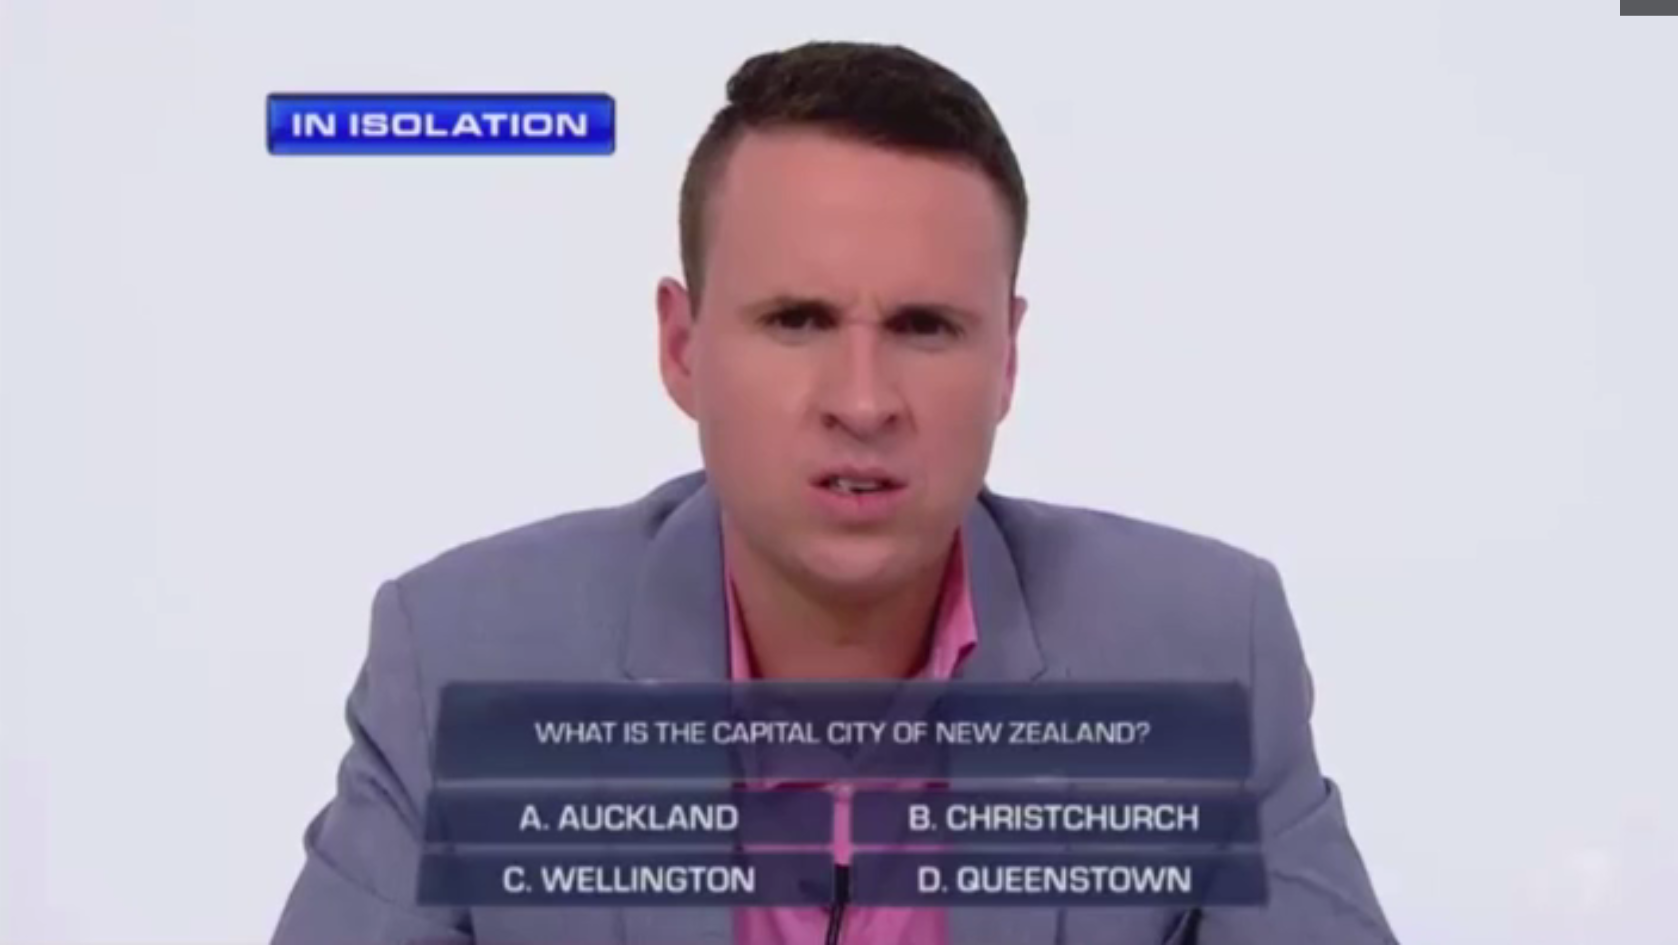 The ridiculously easy question an Australian couple couldn’t answer about New Zealand